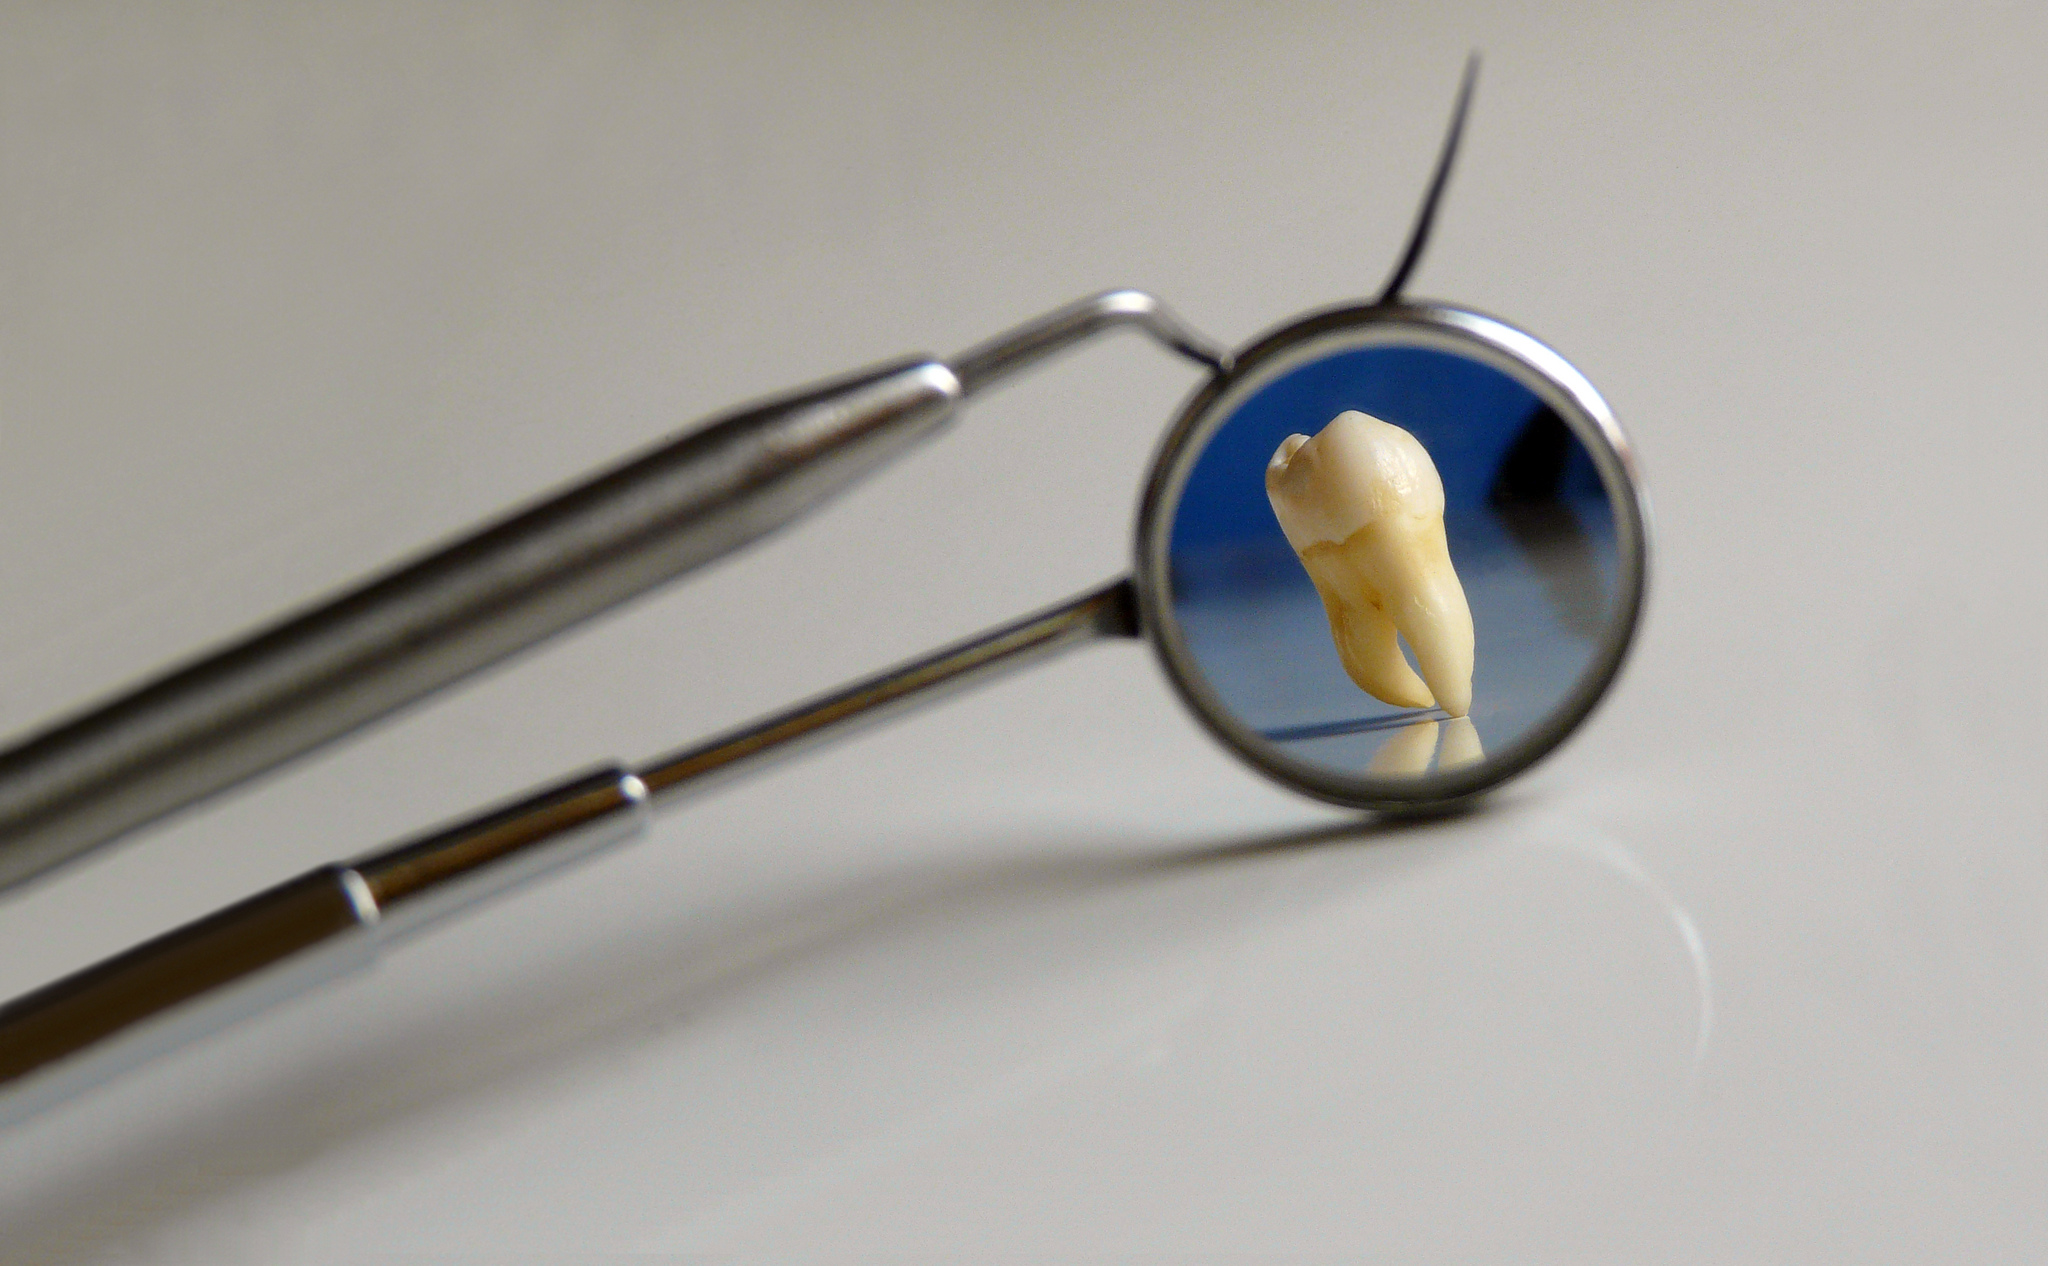 Crucial Facts about Wisdom Teeth